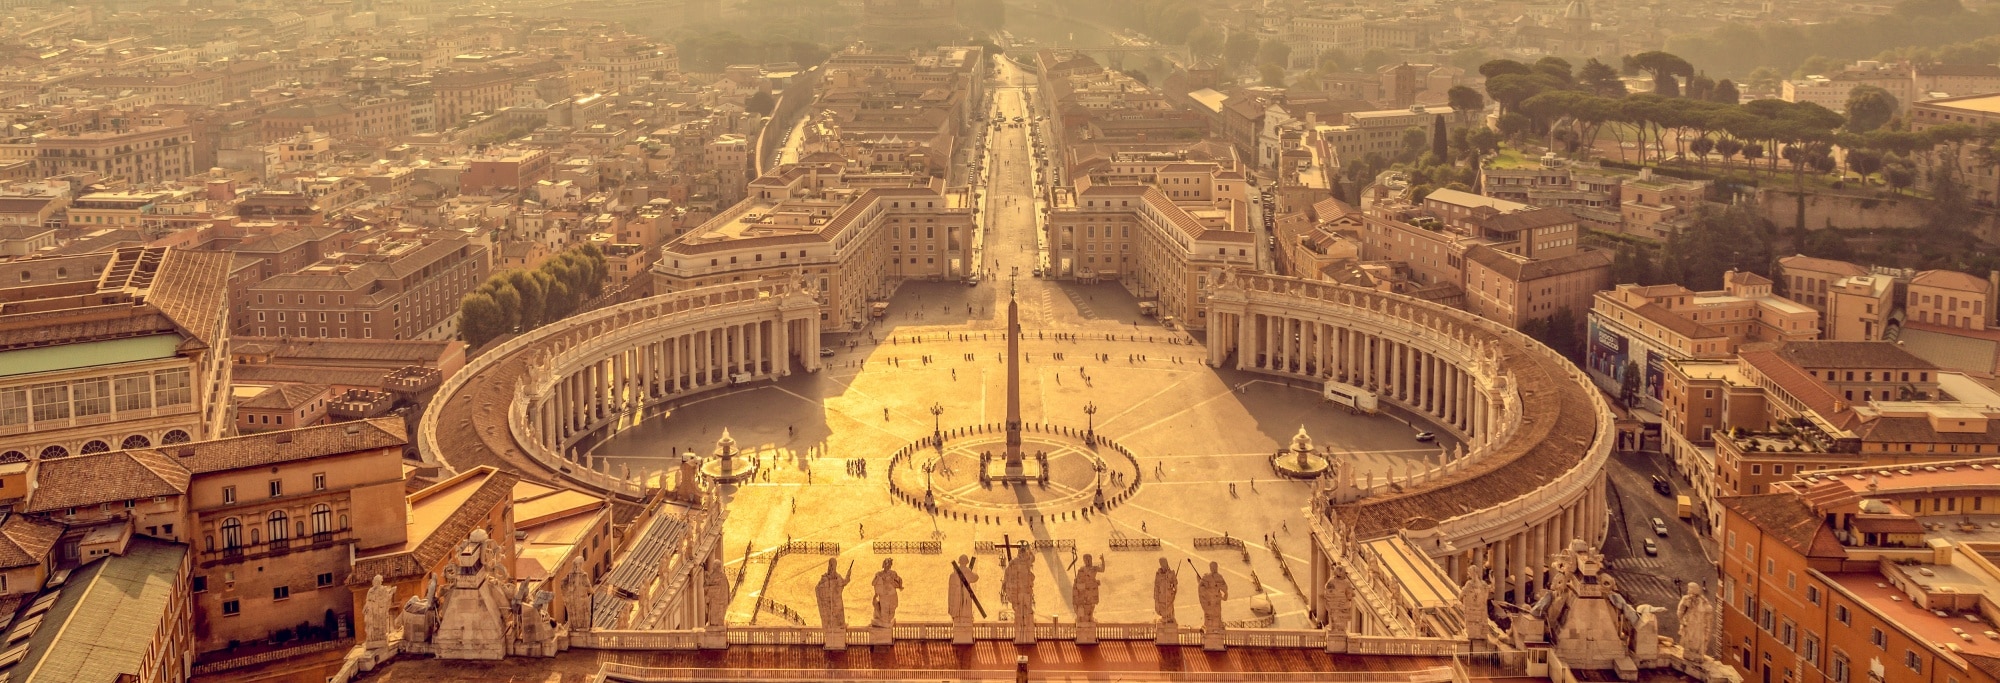 Panoramic aerial view of St Peter's square in Vatican, Rome Italy